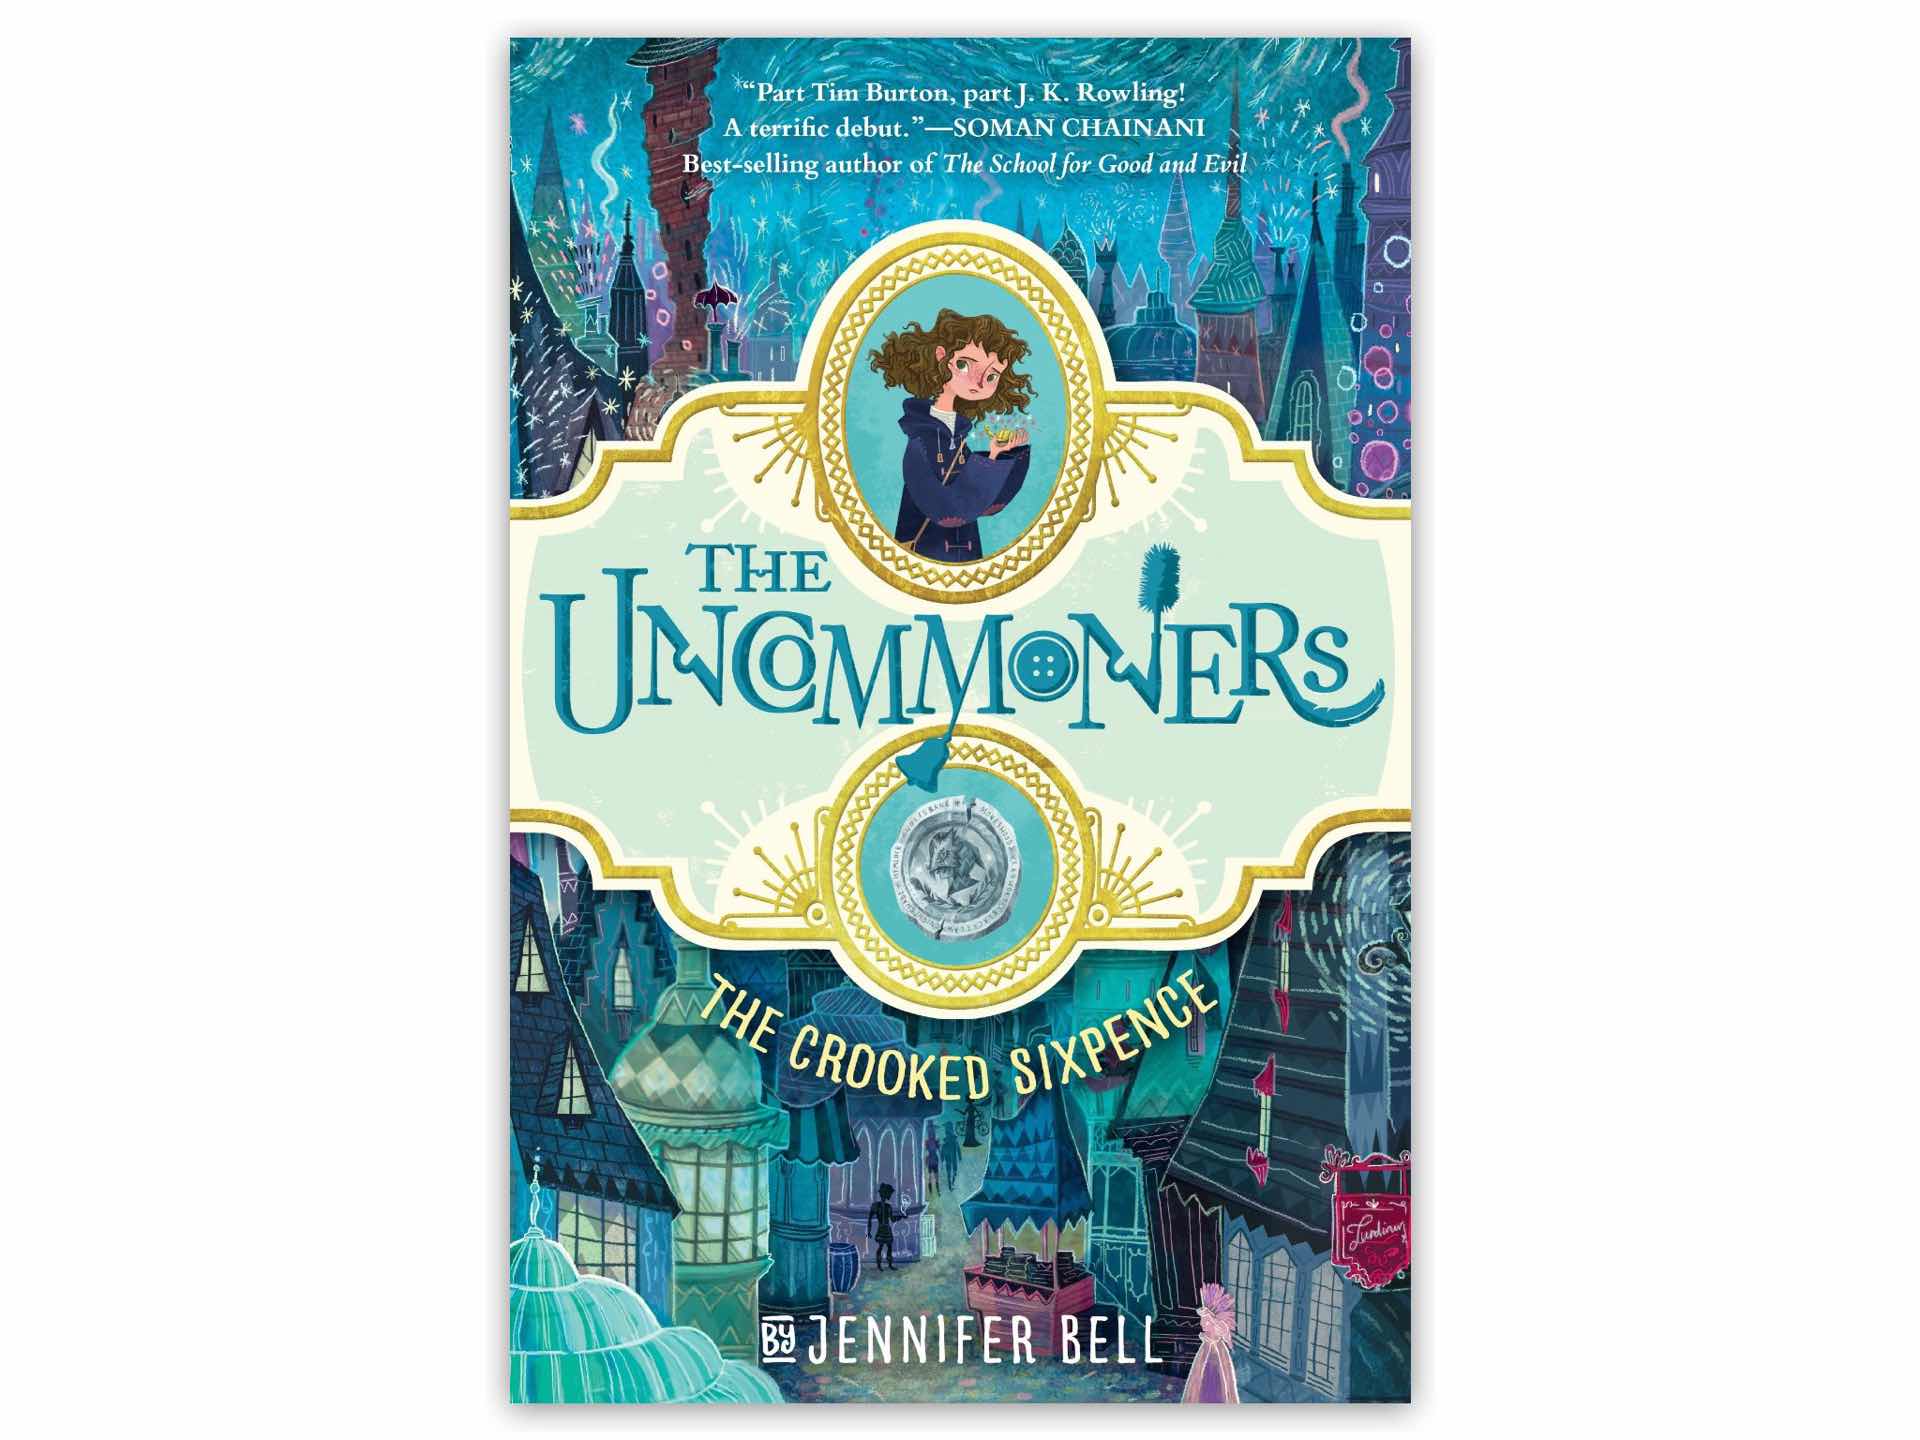 The Uncommoners #1: The Crooked Sixpence by Jennifer Bell.